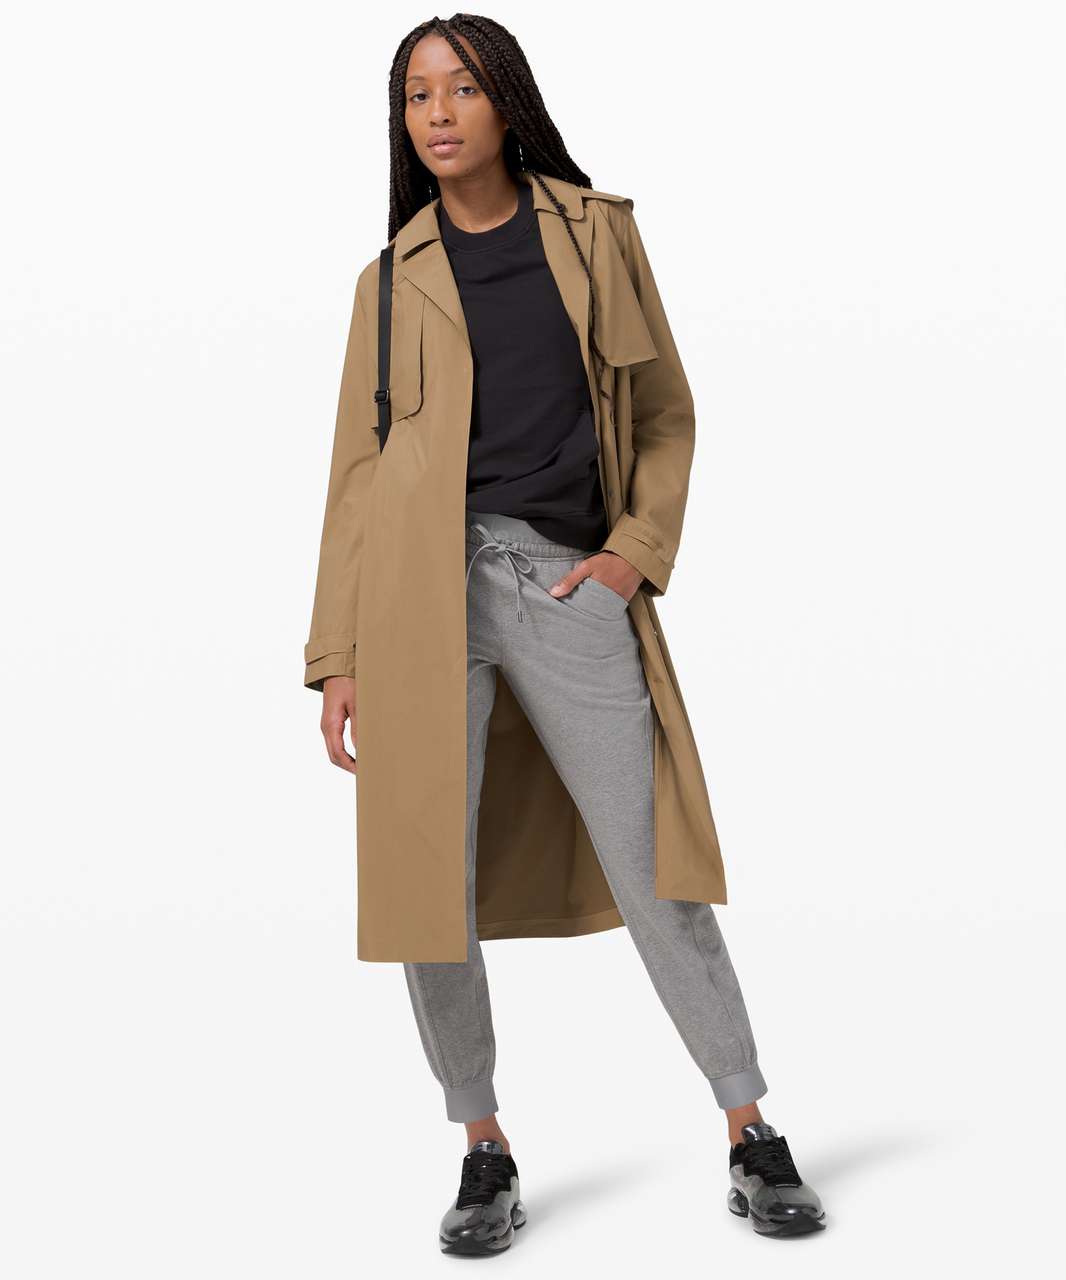 Lululemon Always There Trench Coat - Frontier